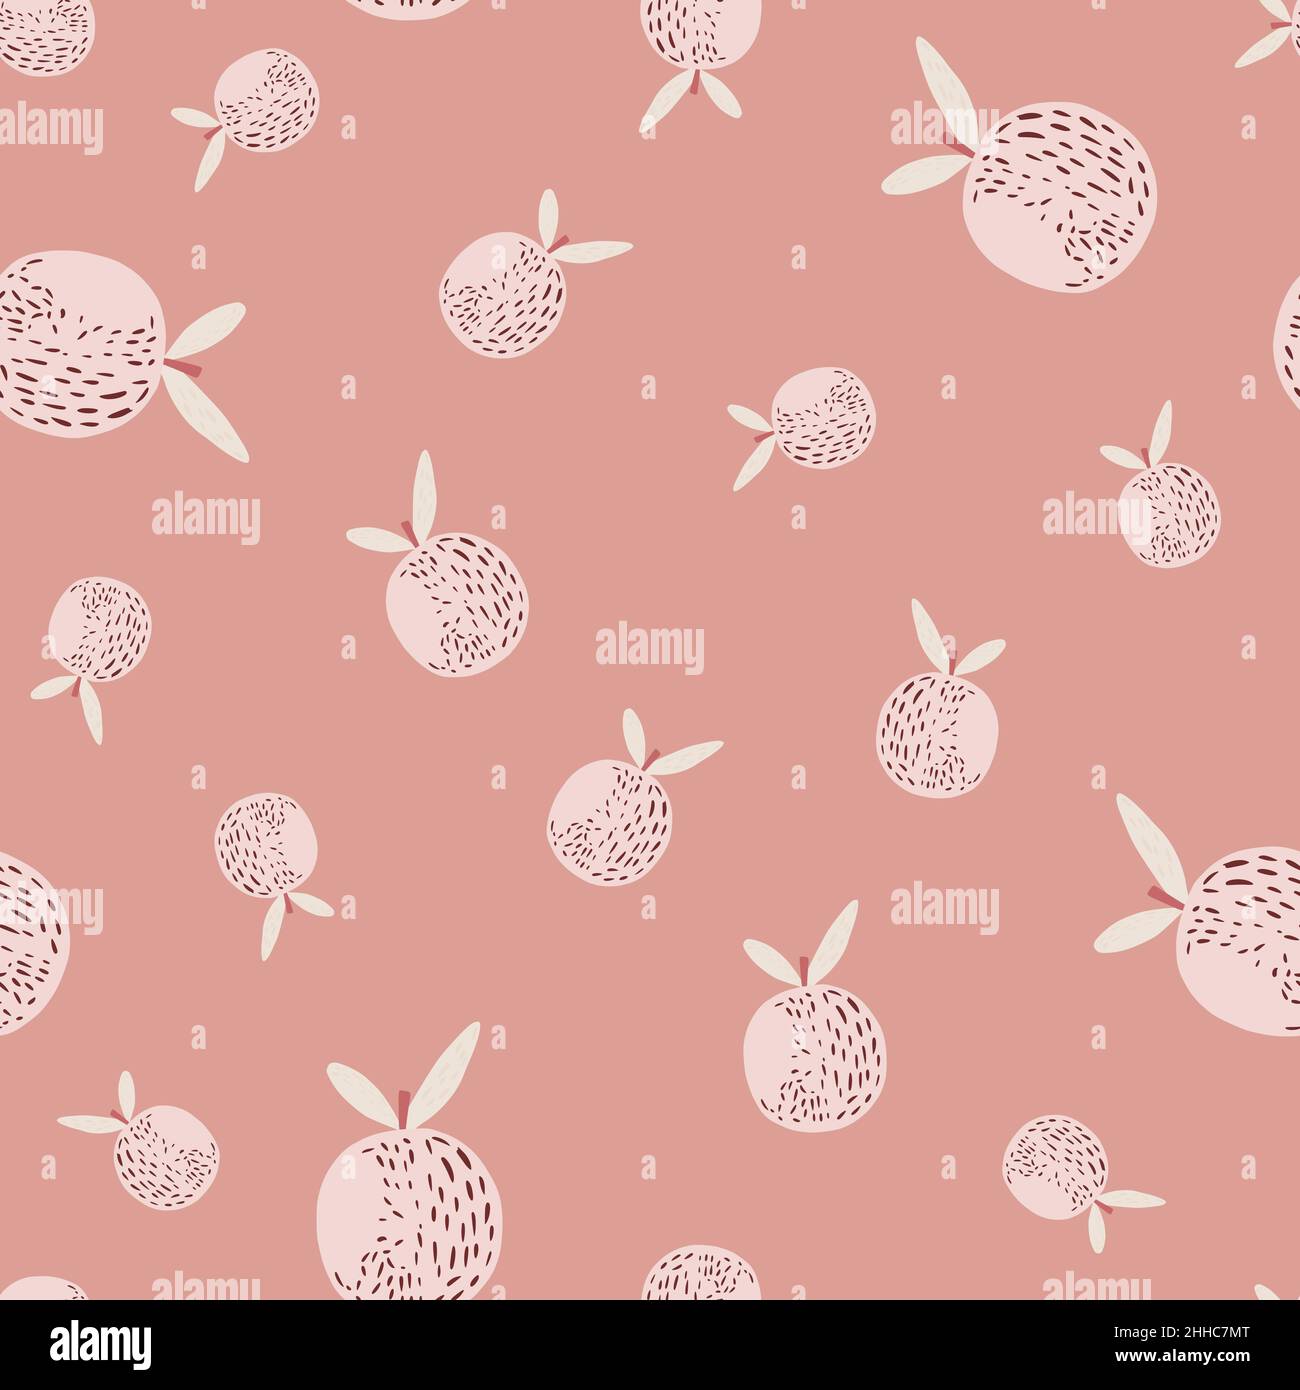 Random seamless pattern with citrus orange fruit silhouettes in light tones. Pink background. Graphic design for wrapping paper and fabric textures. V Stock Vector